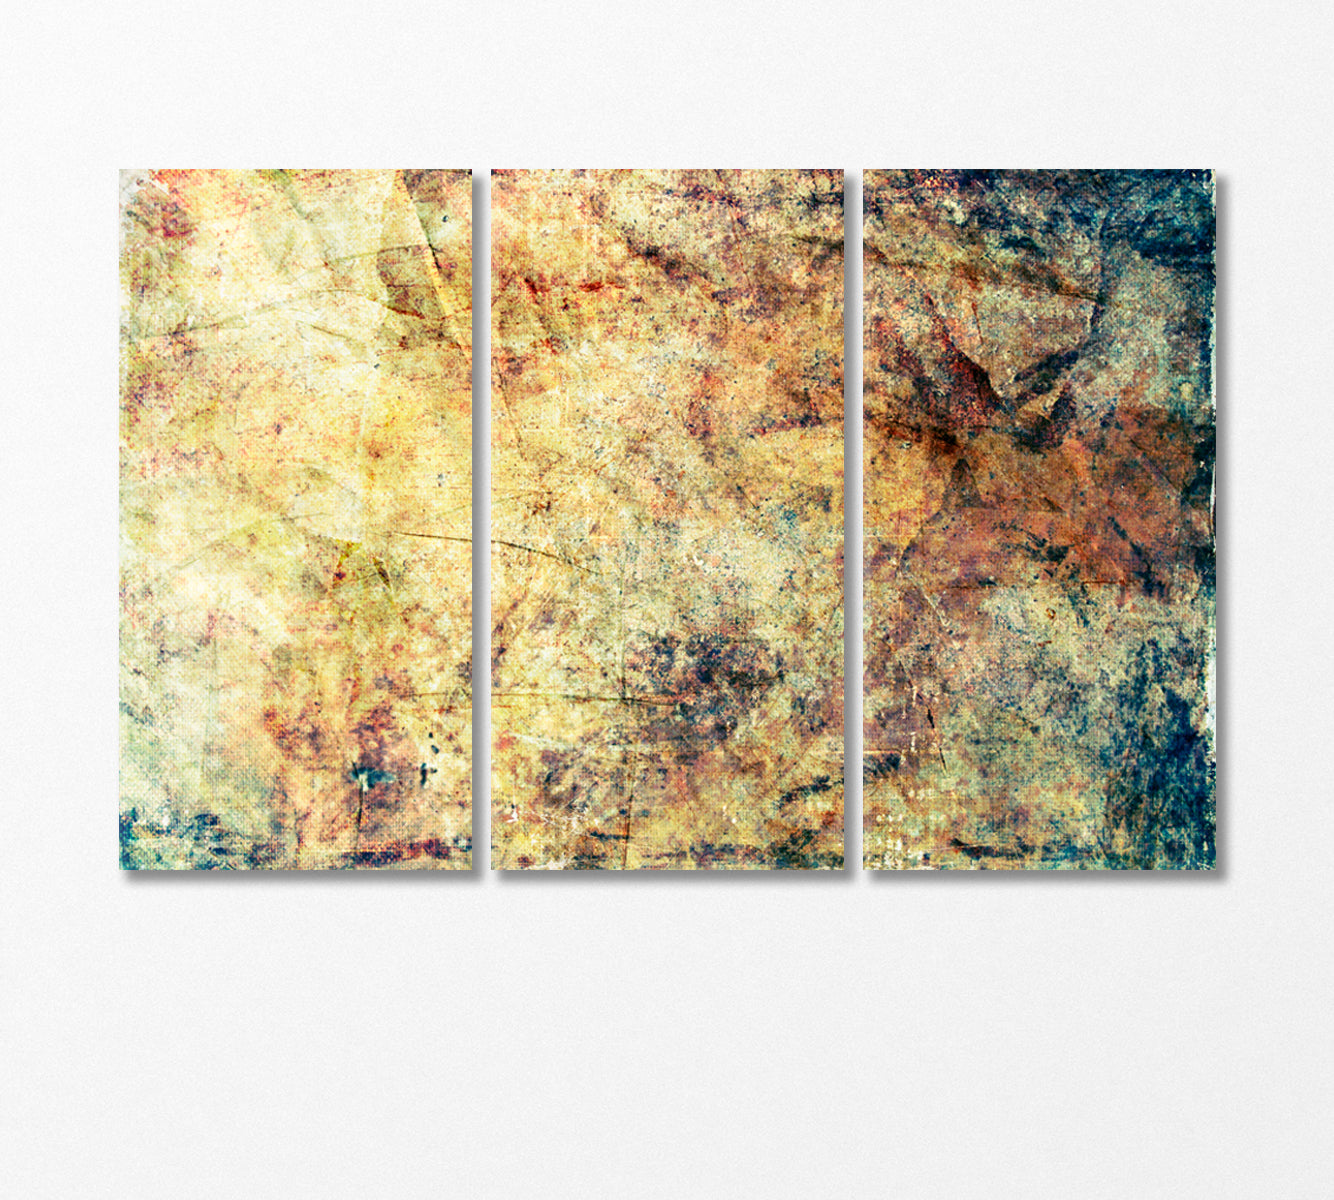 Wall Fragment with Scratches and Cracks Canvas Print-Canvas Print-CetArt-3 Panels-36x24 inches-CetArt